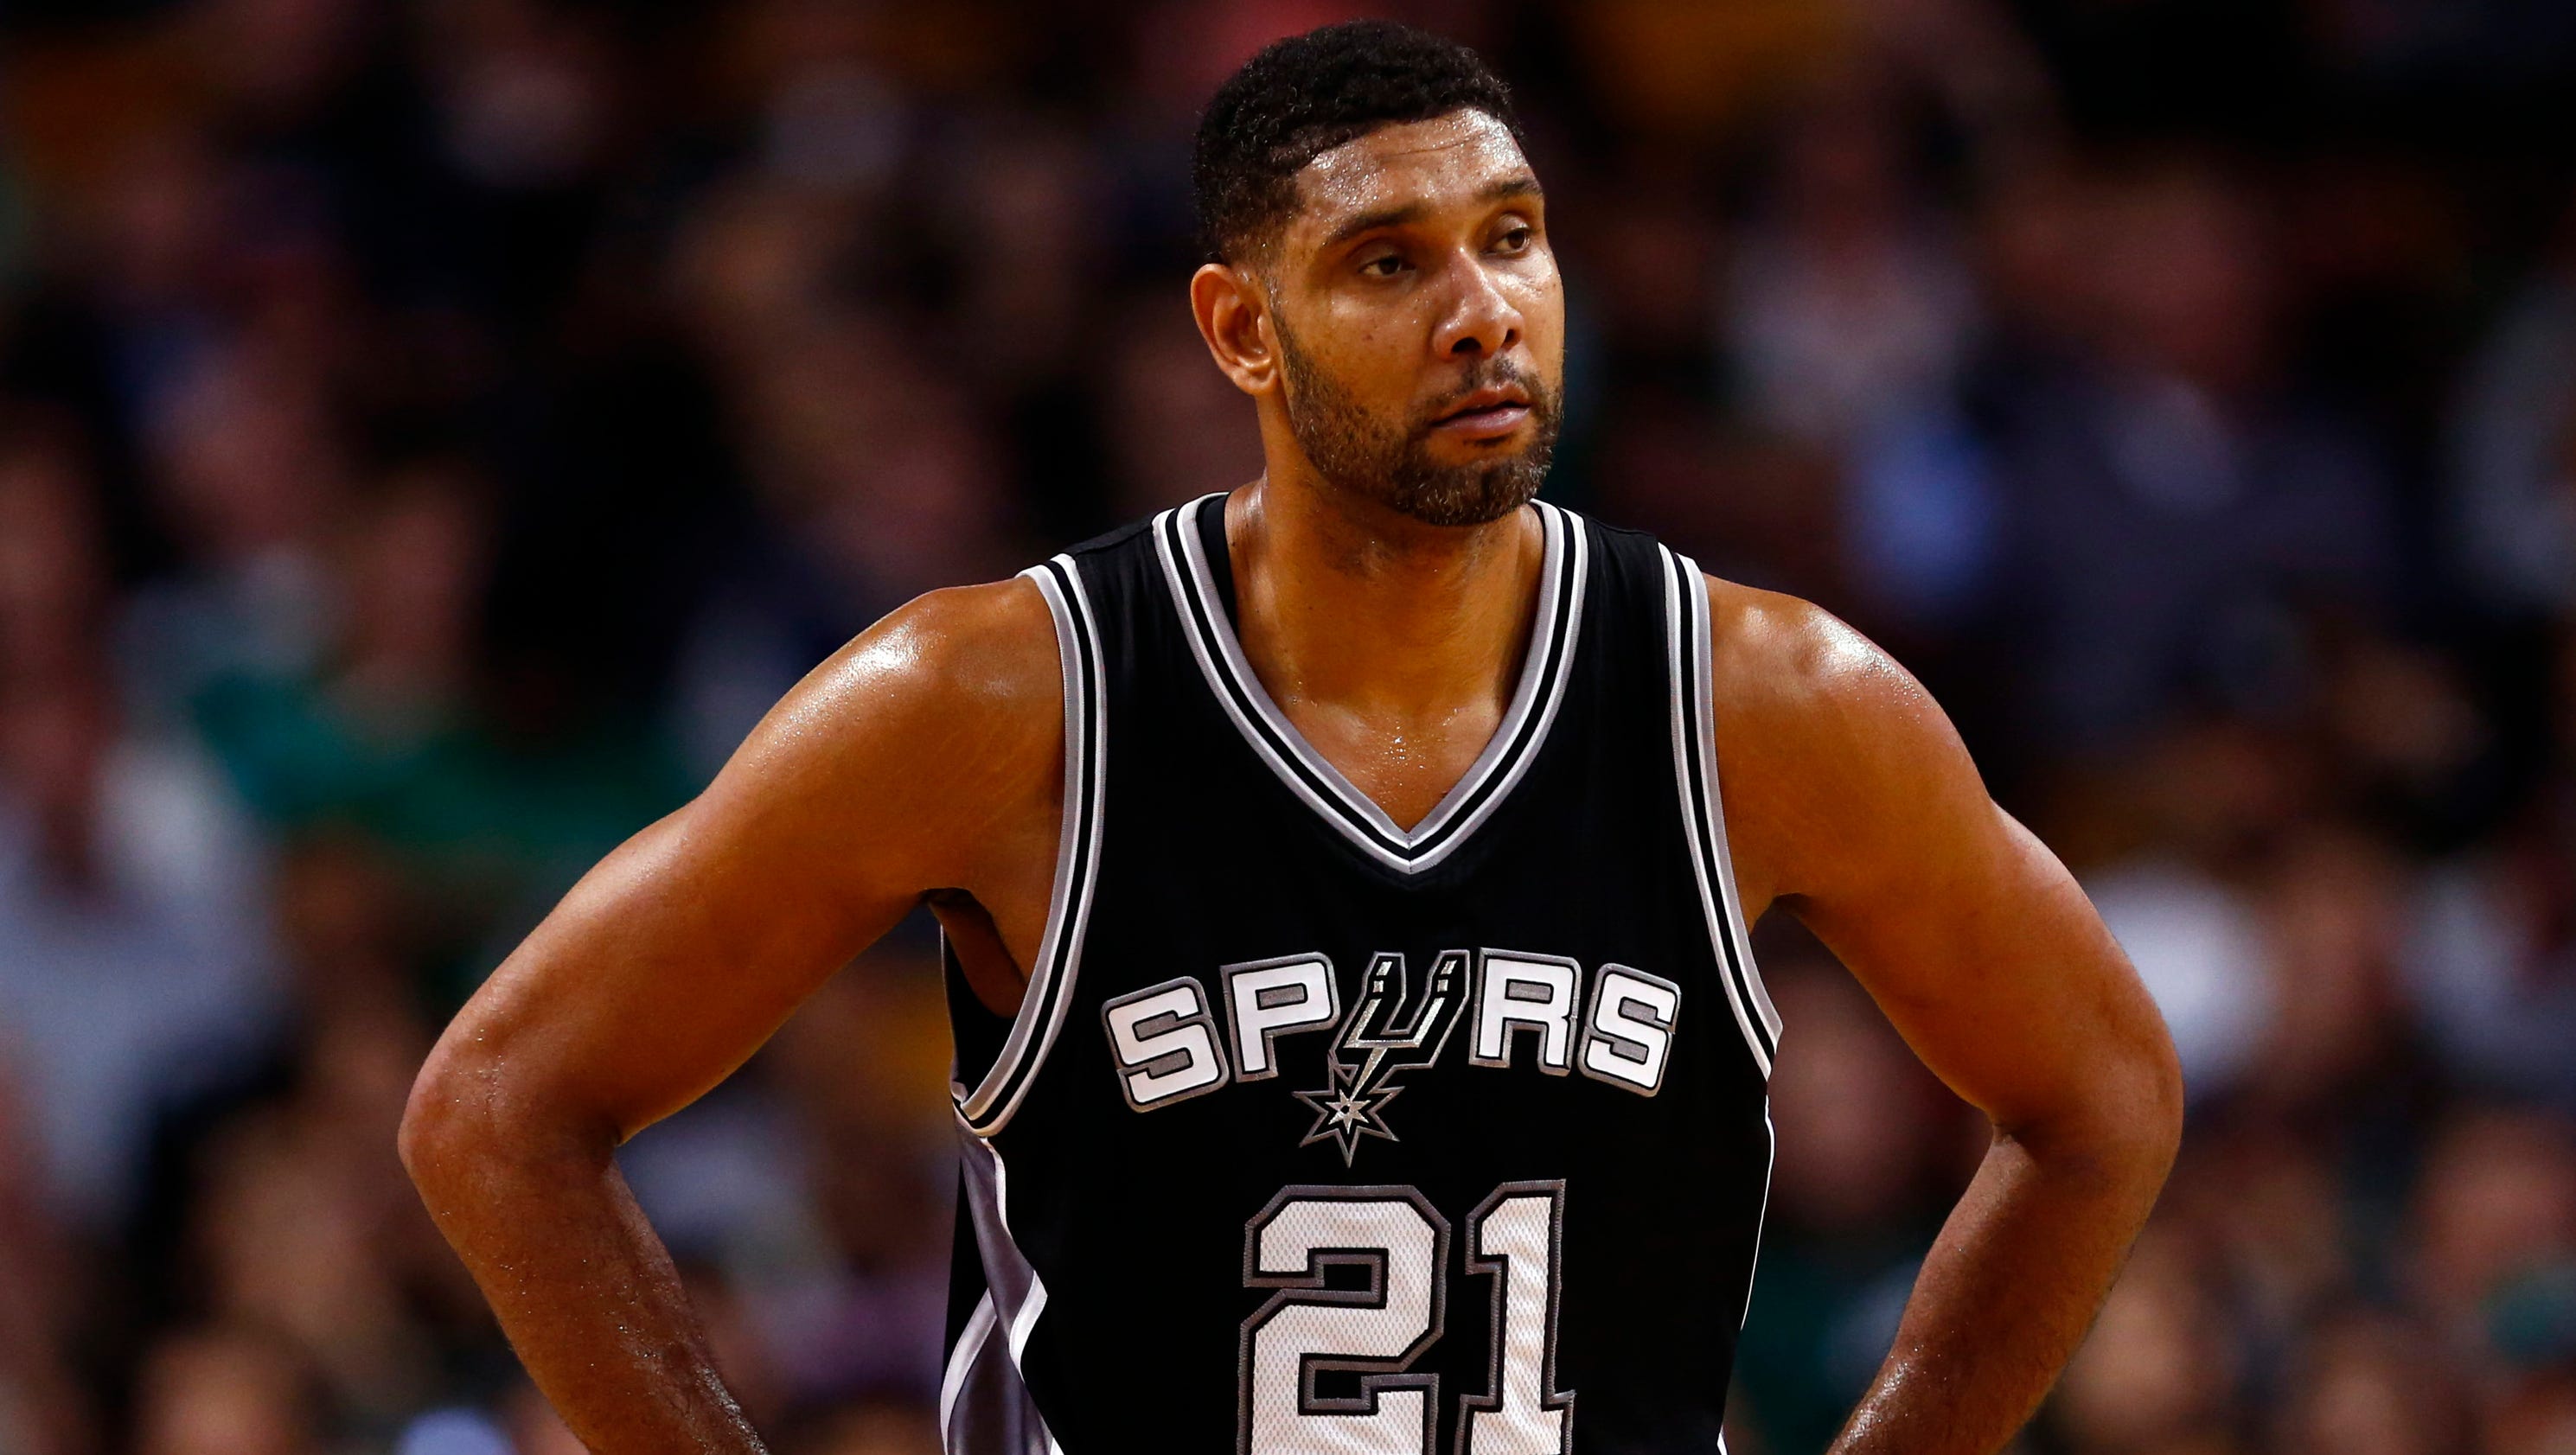 NBA world reacts to Tim Duncan's retirement3200 x 1680